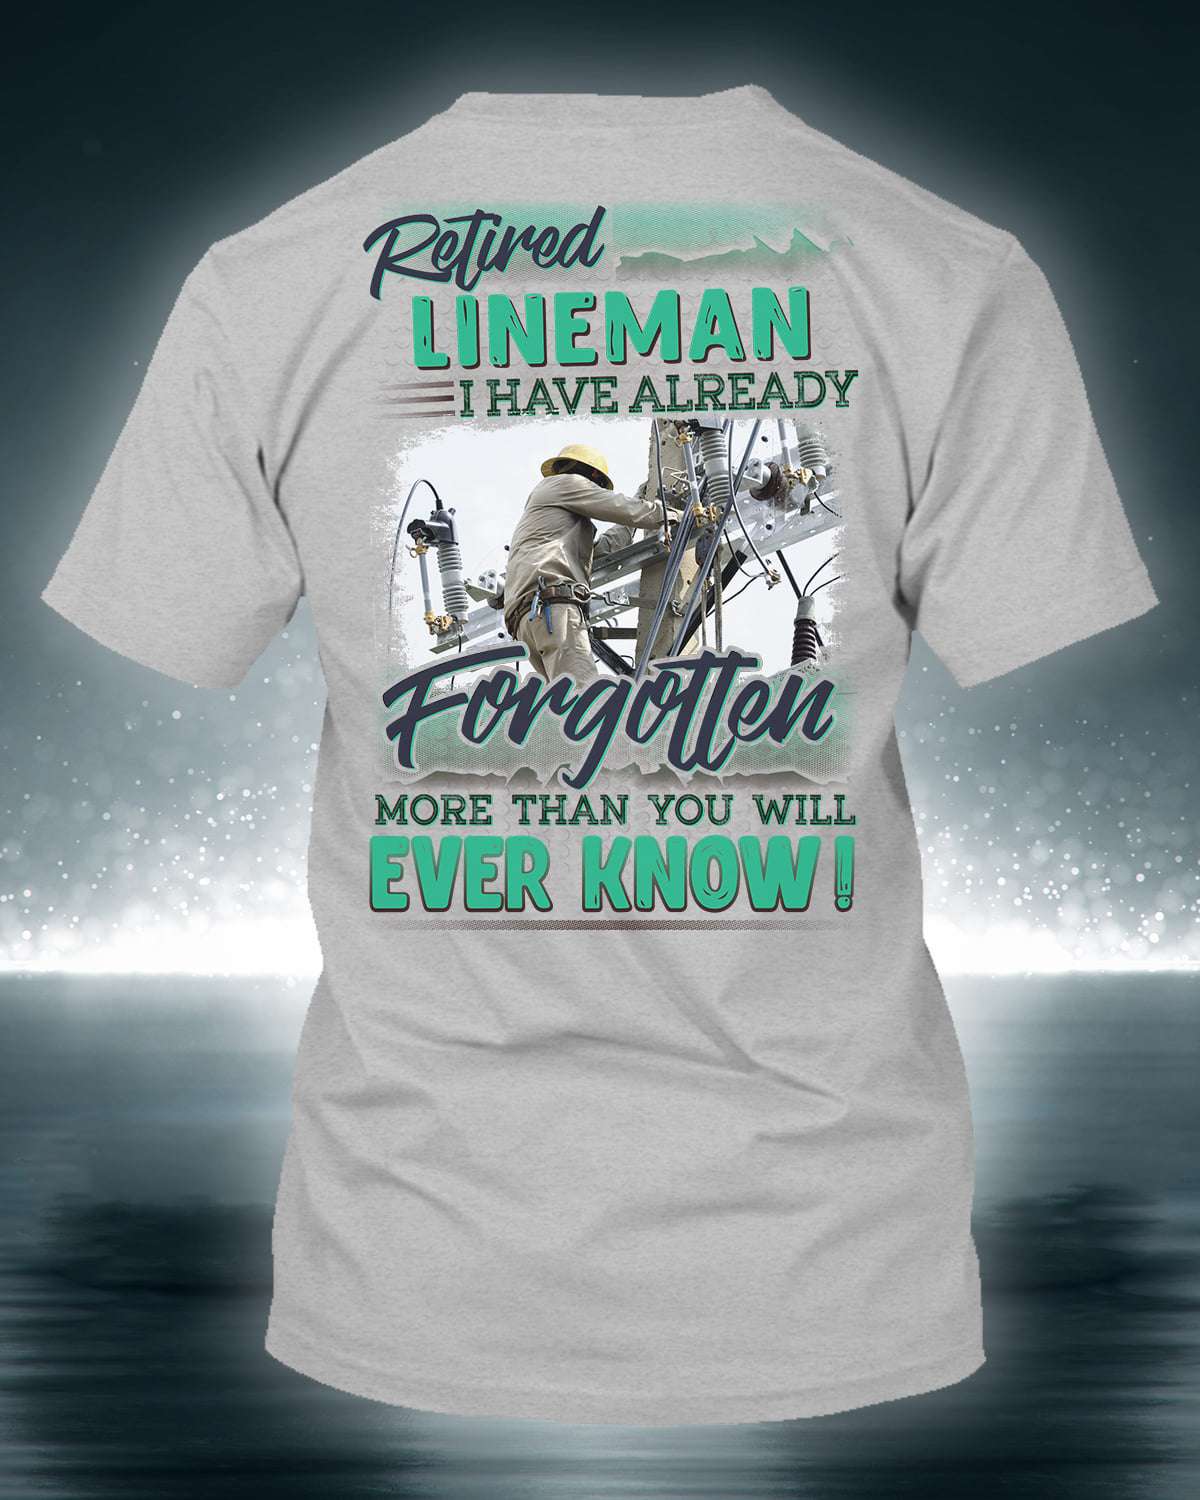 Love Electrician - Retired lineman i have already forgotten more than you'll ever know